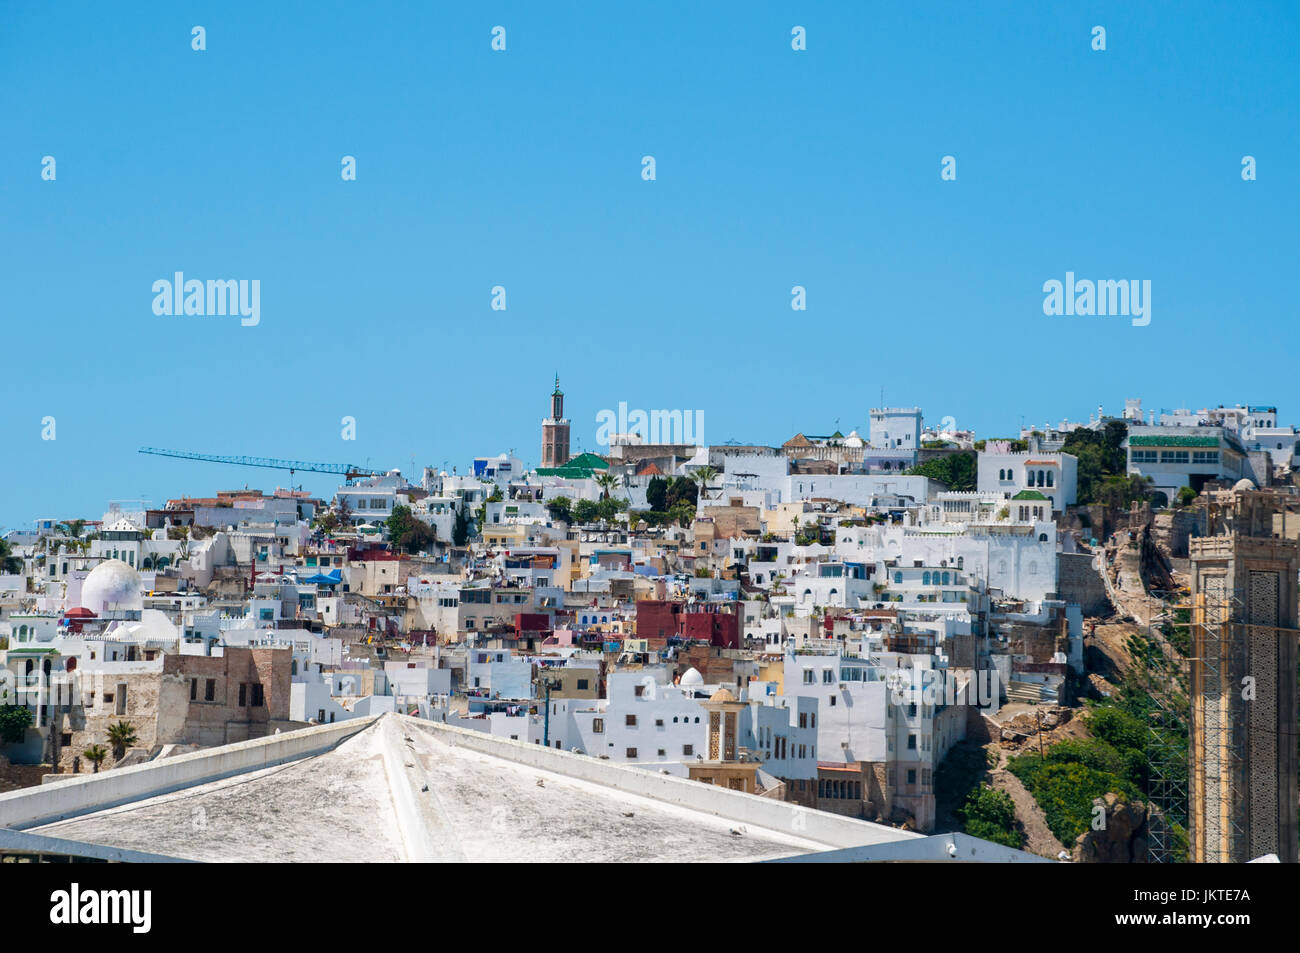 North Africa, Morocco: the roofs and the skyline of Tangier, Moroccan city on the Maghreb coast at the western entrance to the Strait of Gibraltar Stock Photo